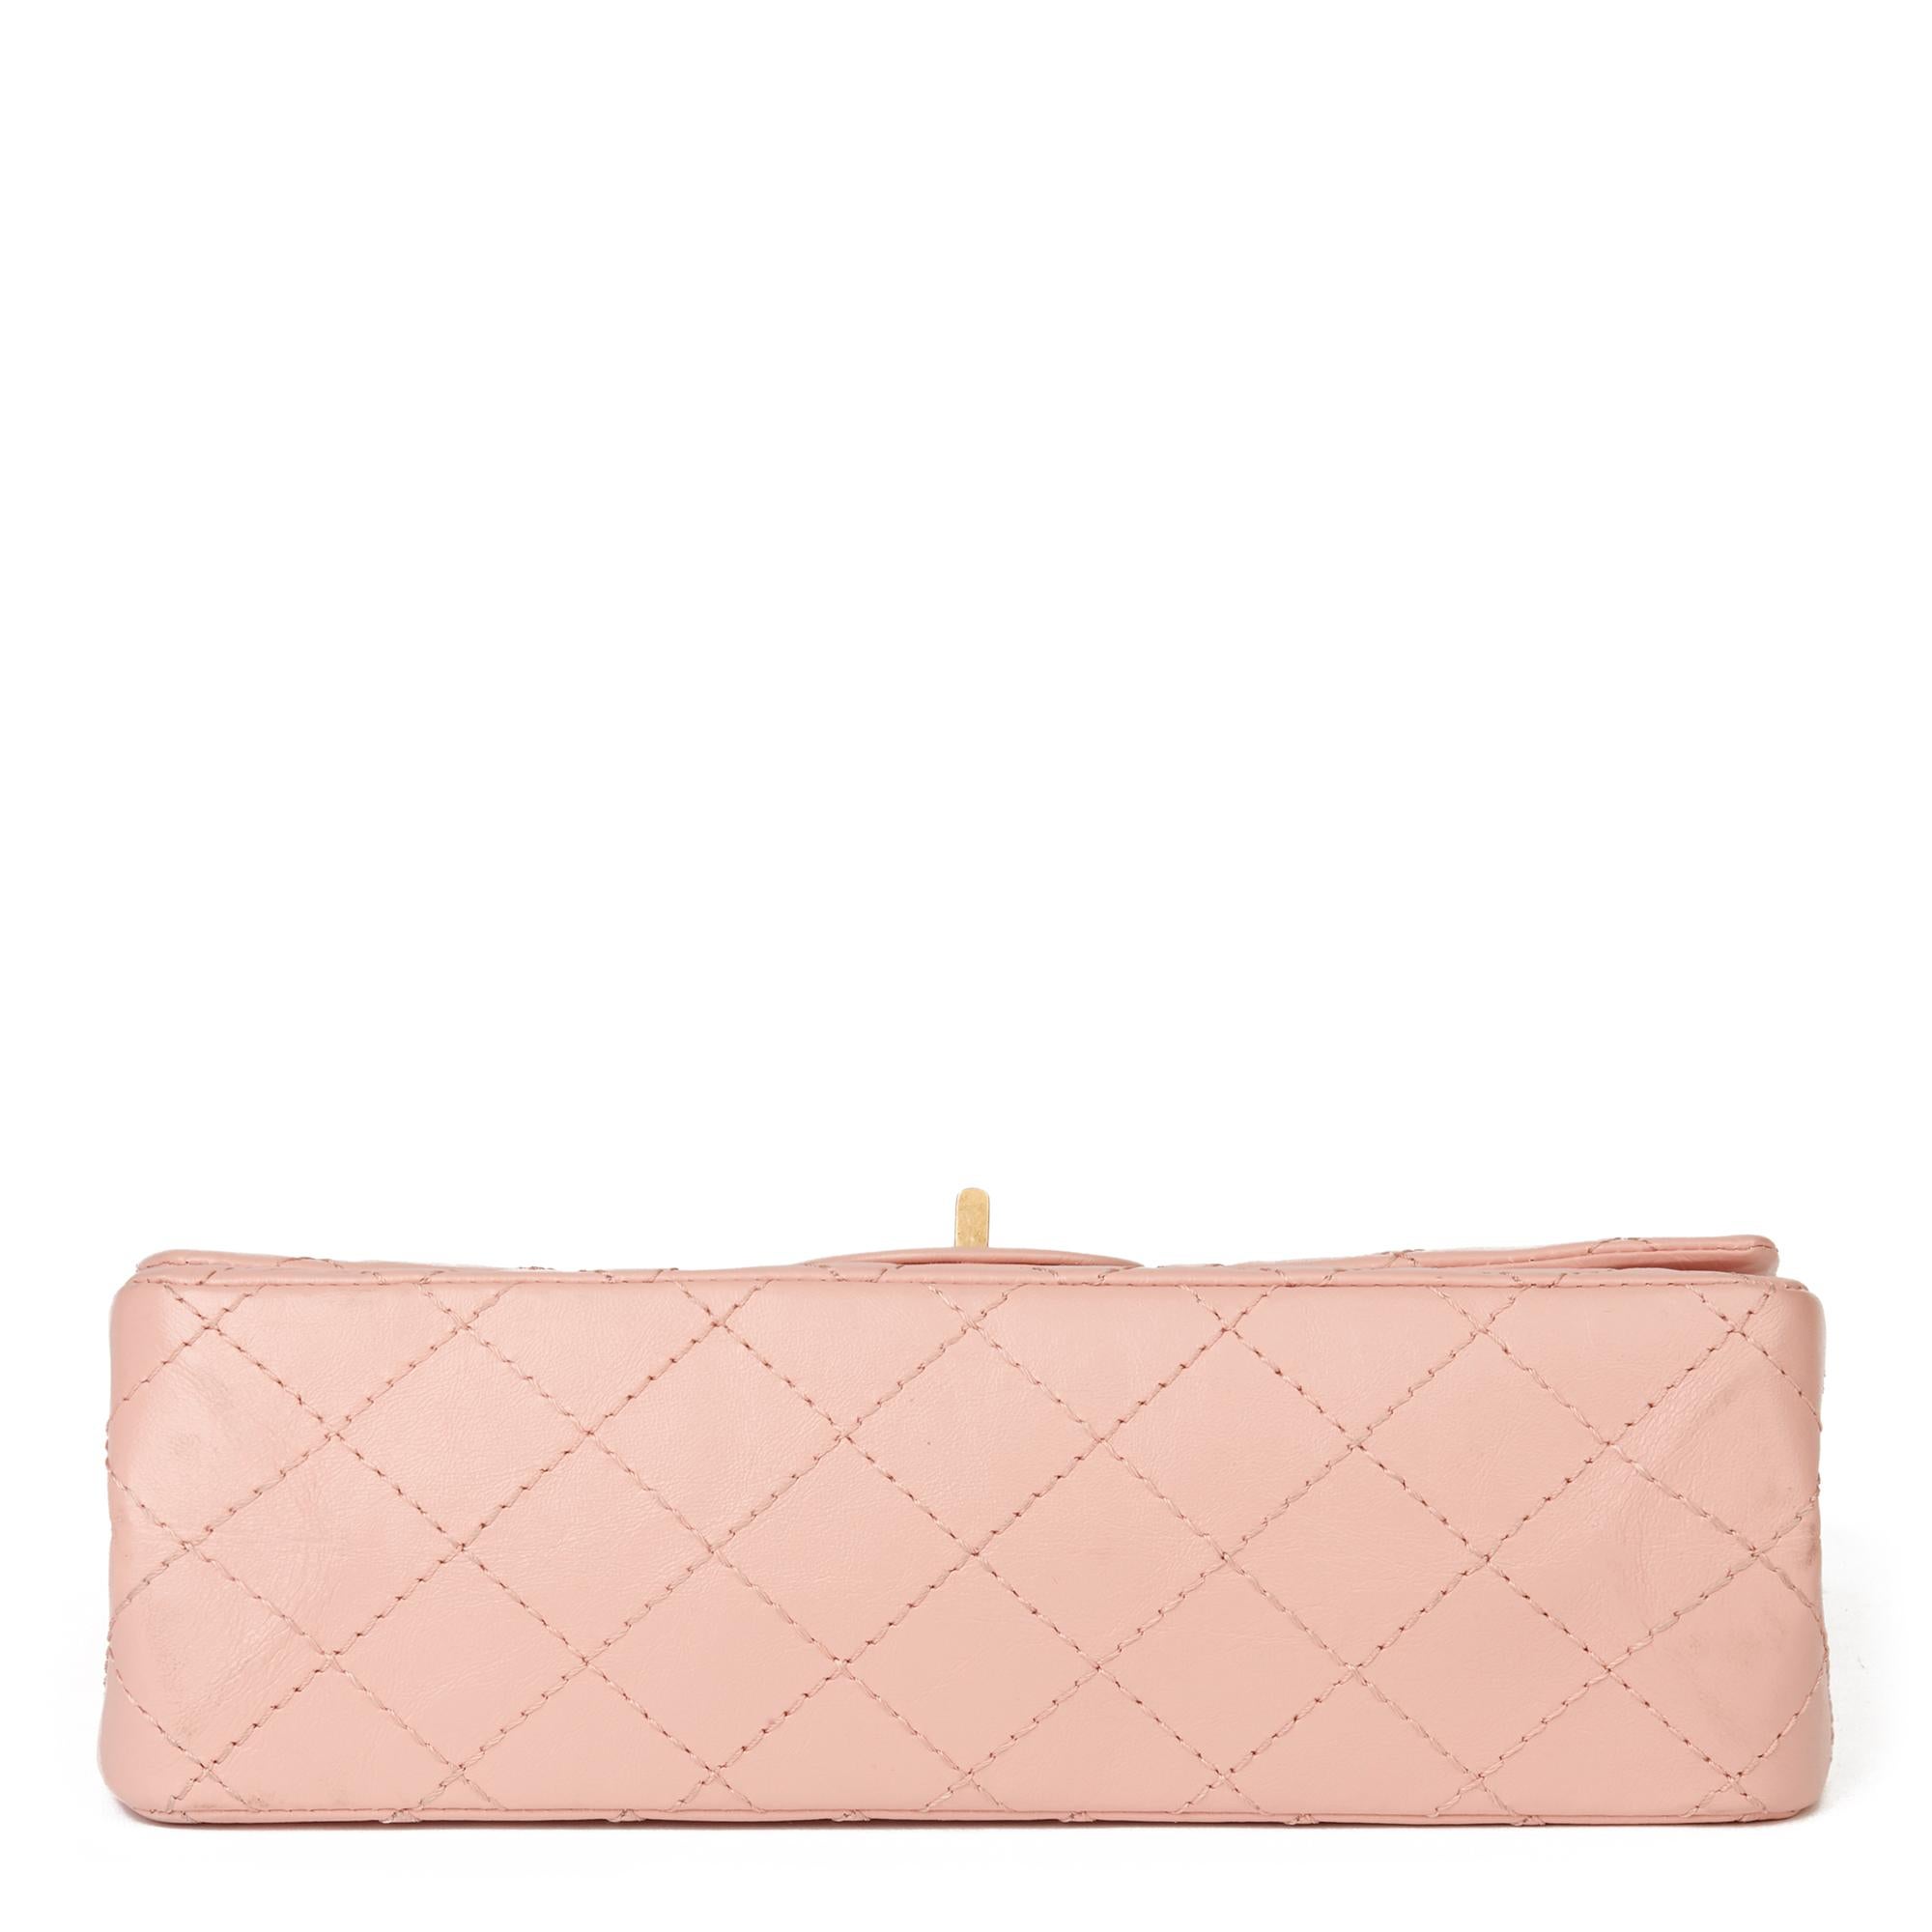 Orange 2019 Chanel Pink Quilted Aged Calfskin Leather 2.55 Reissue 225 Double Flap Bag 